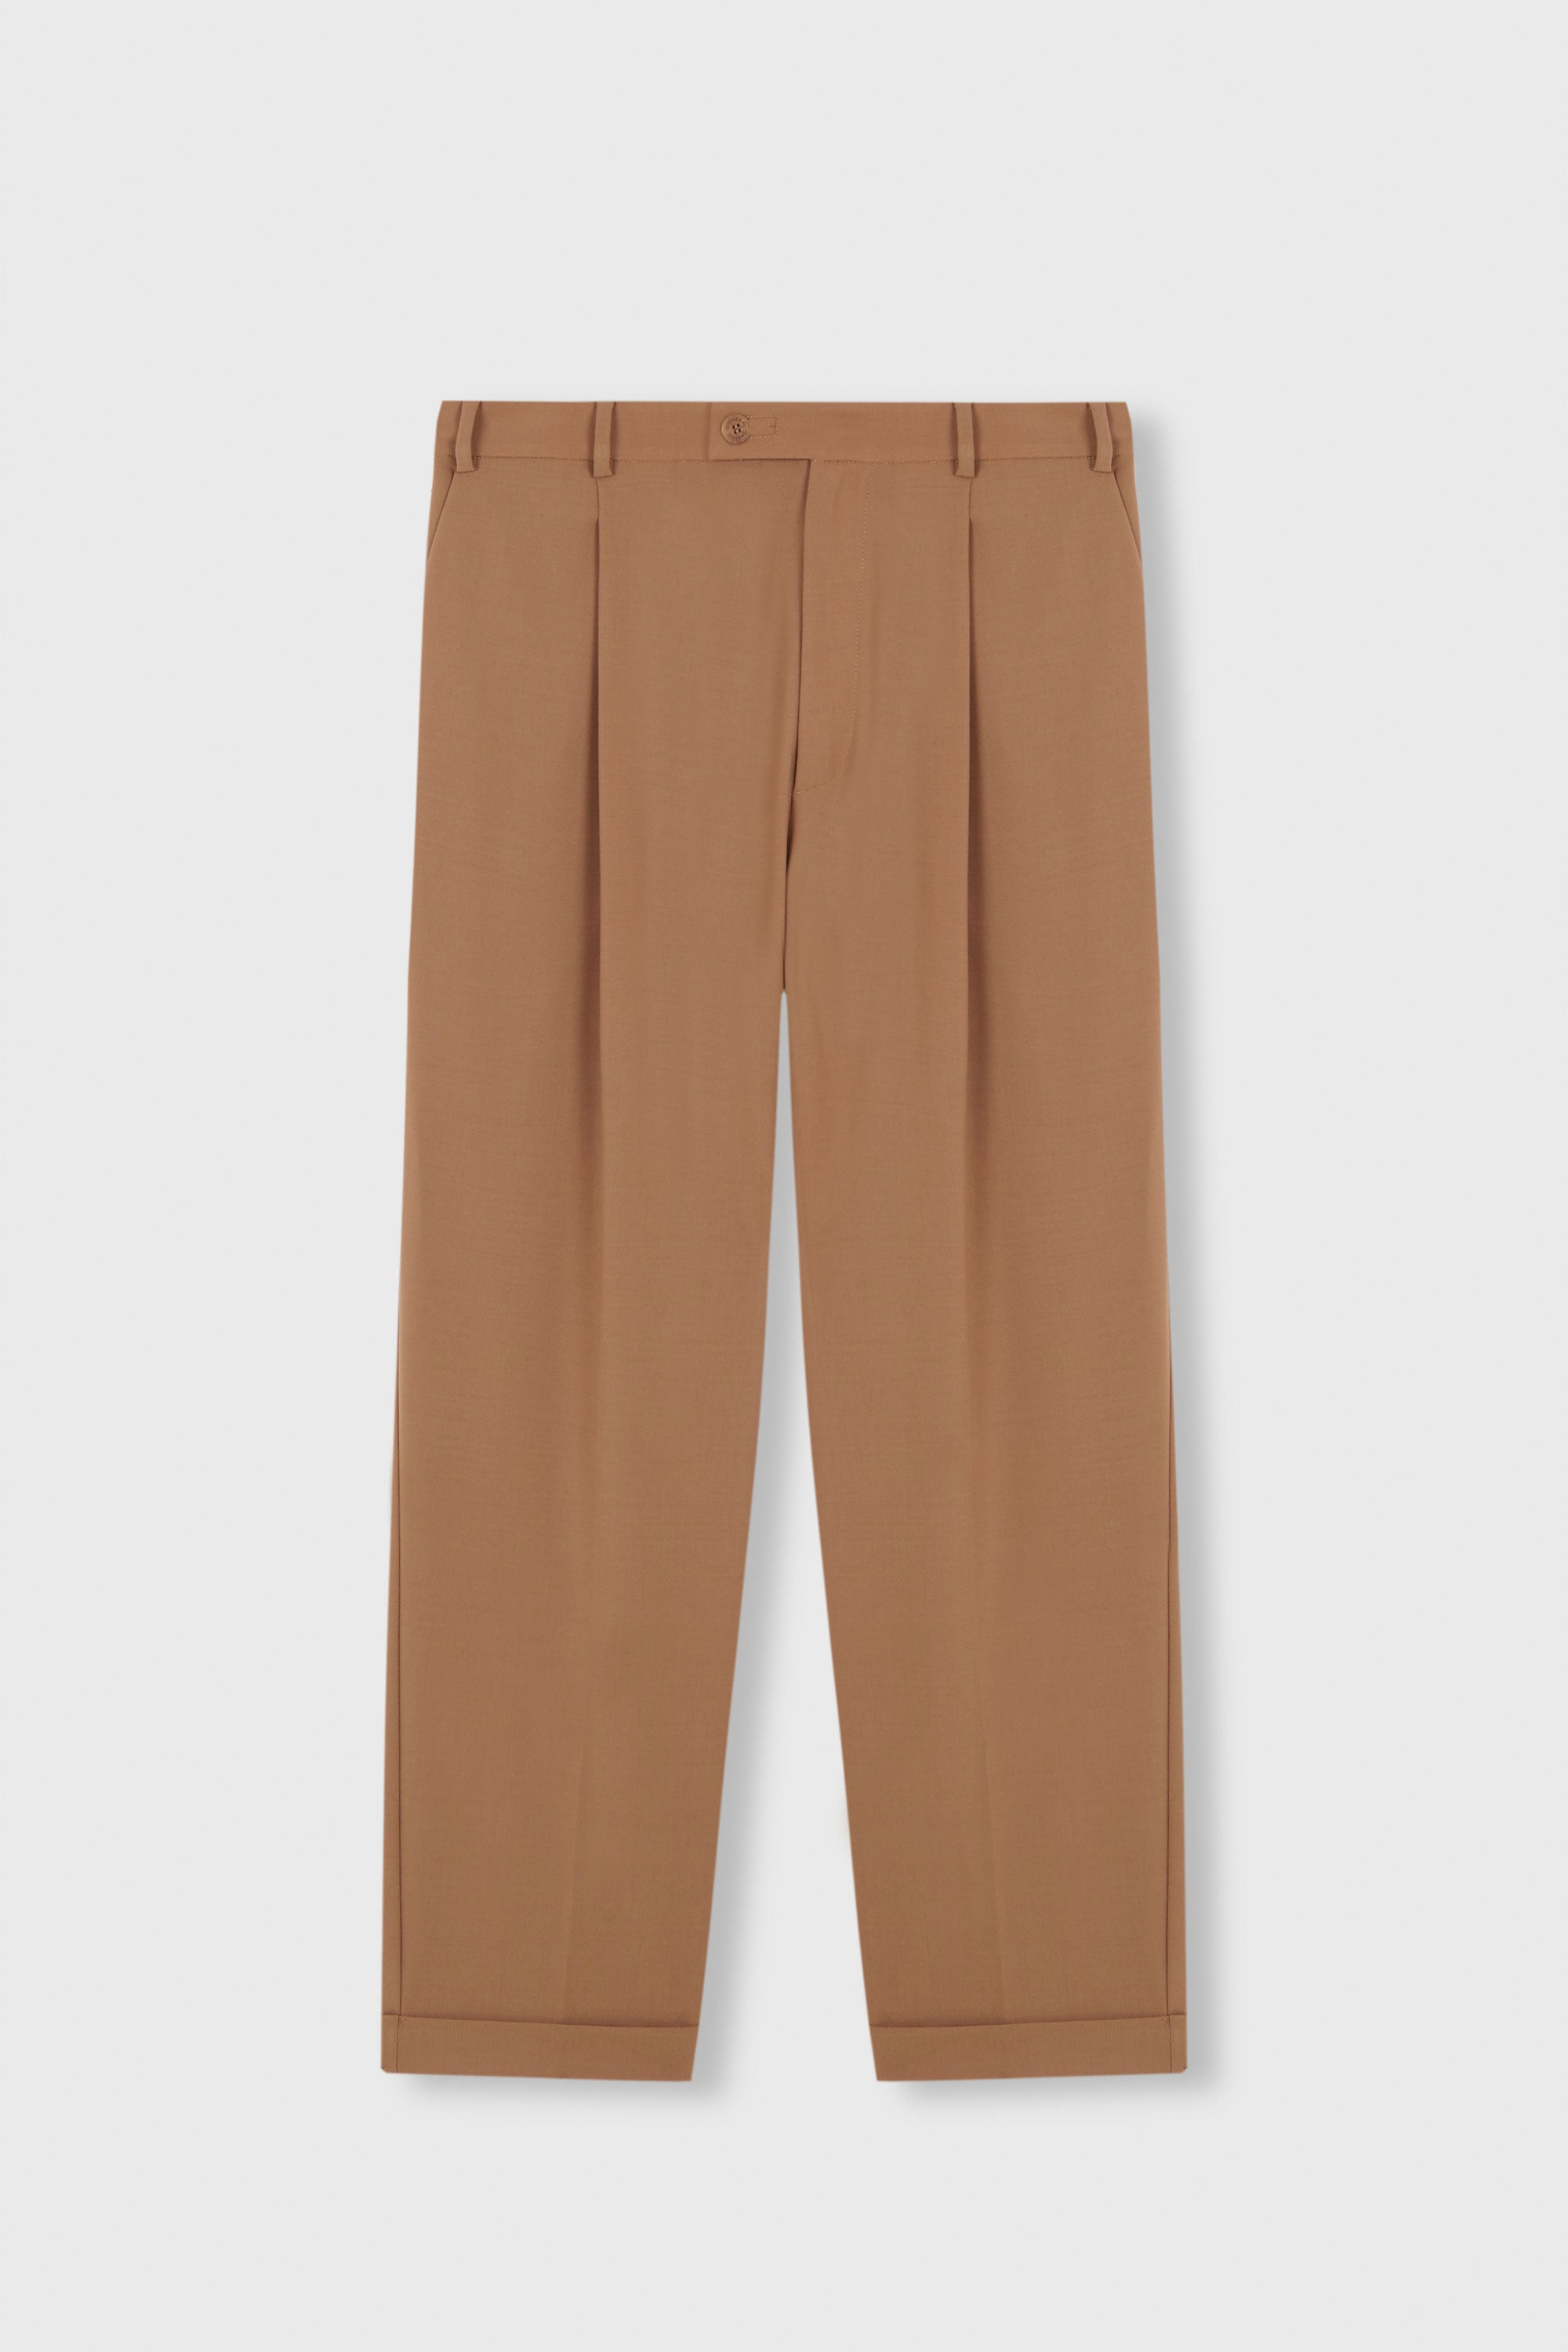 Buy Max Mara Pegno Tapered Trousers - Camel At 70% Off | Editorialist